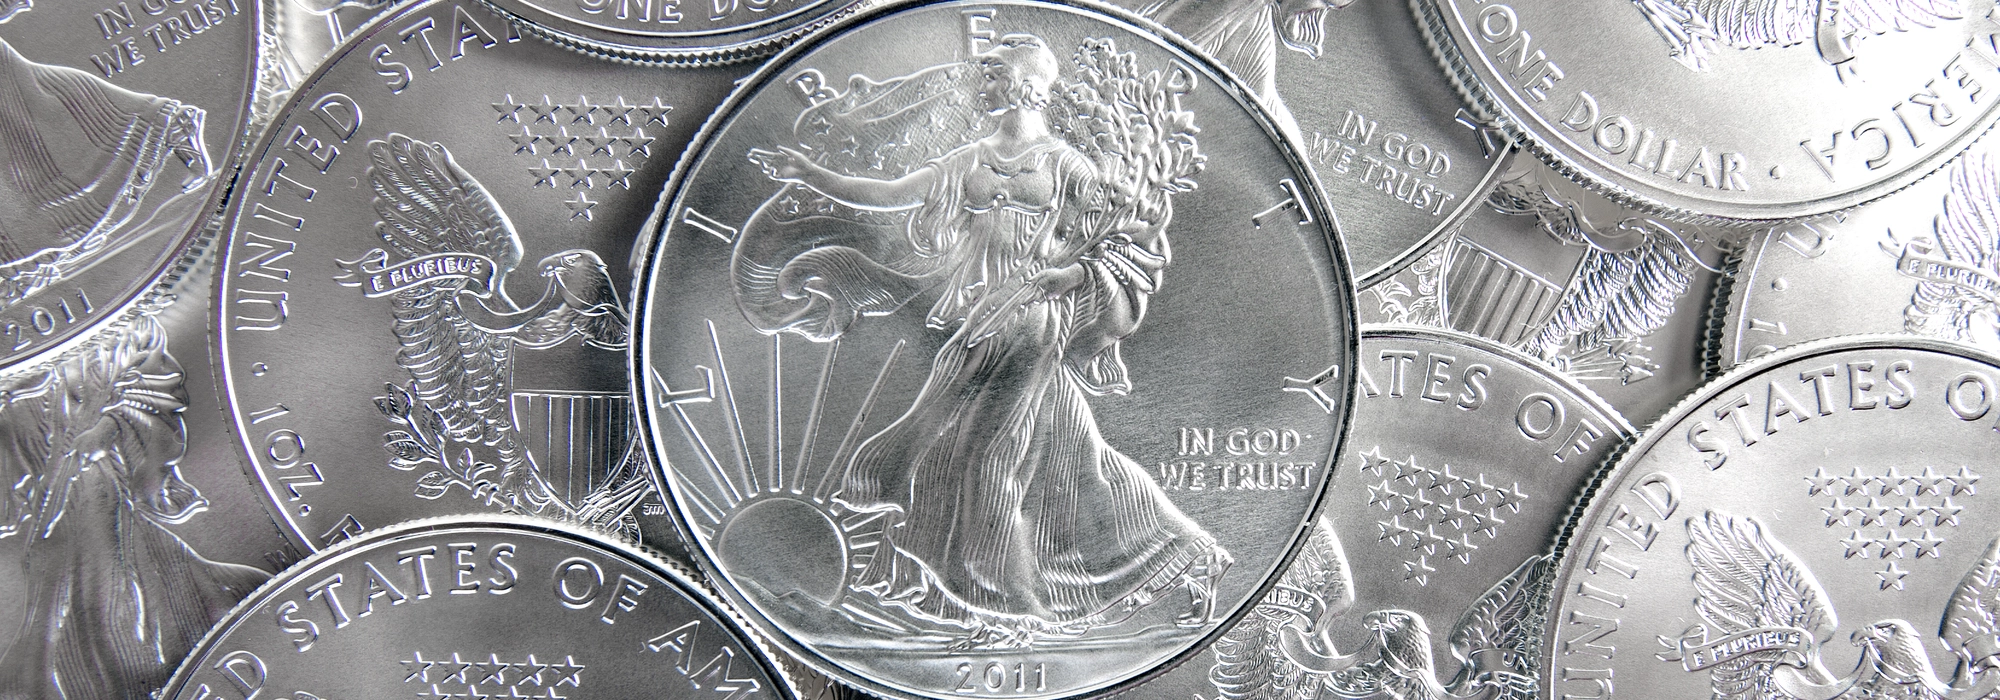 Uses of Silver in Electronics, Coins, Jewelry, Medicine